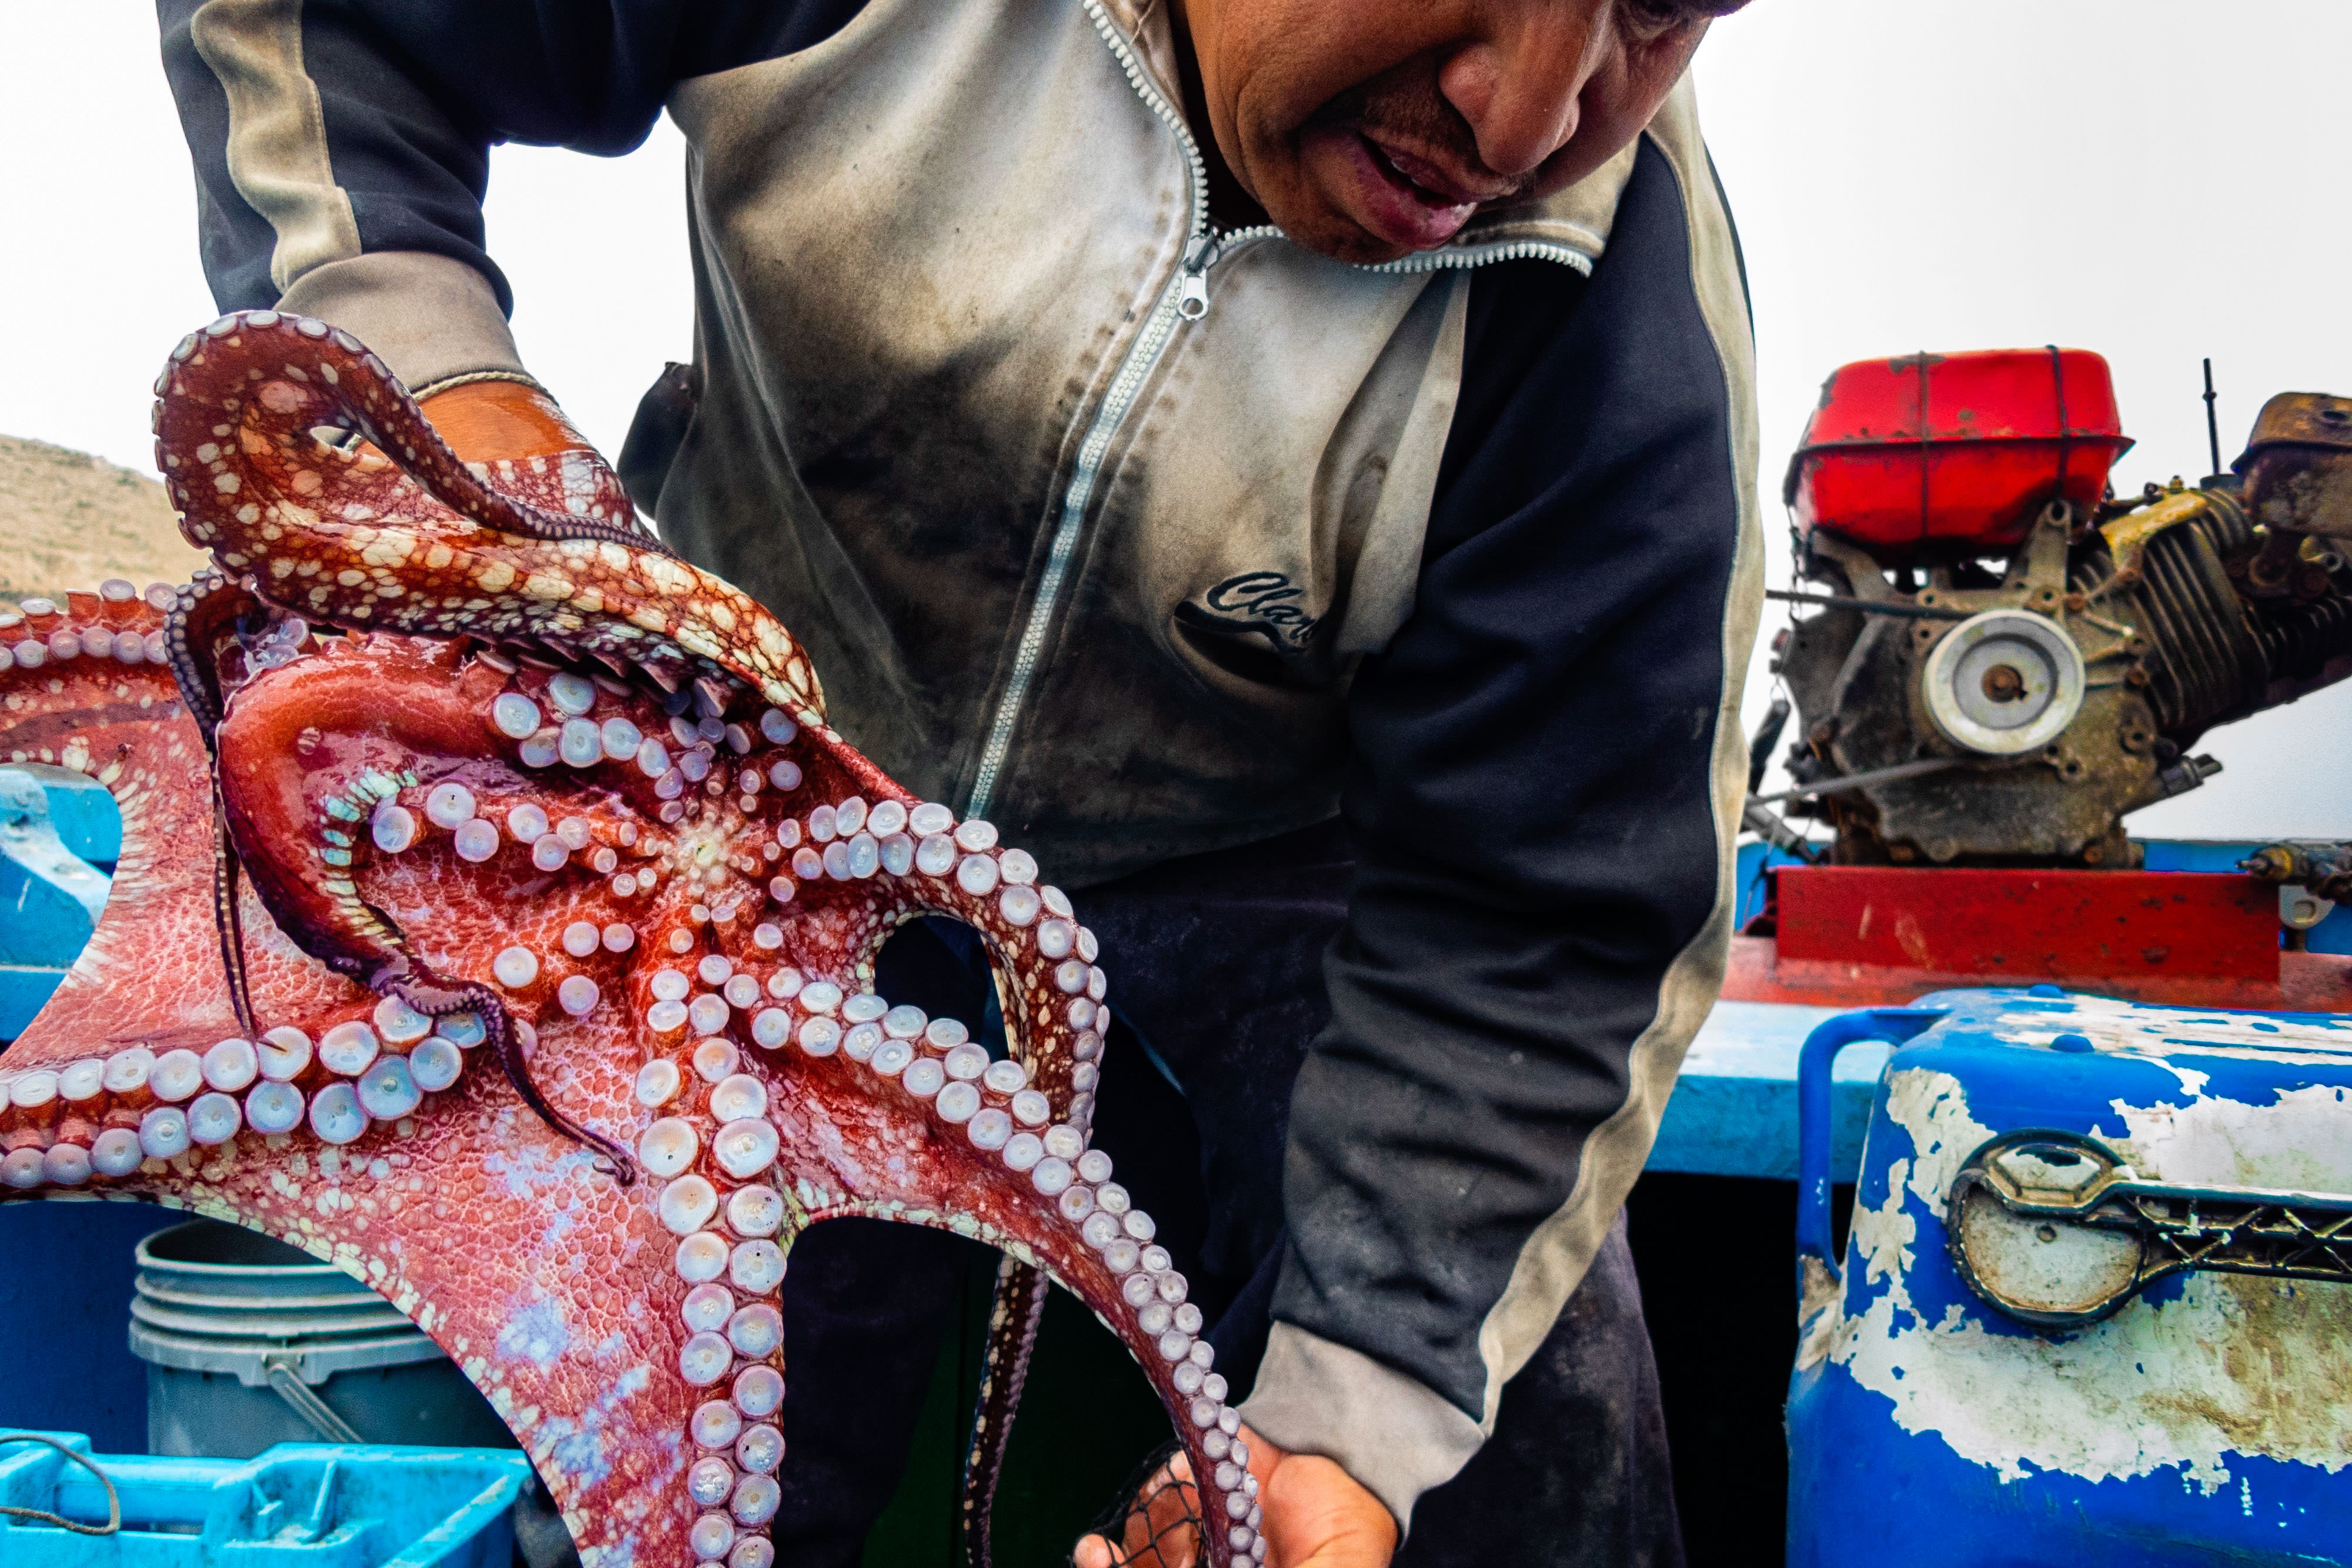 Ricardo Rojas bags an octopus, one of the most valuable species to fish off the shores of Ancon, Peru.